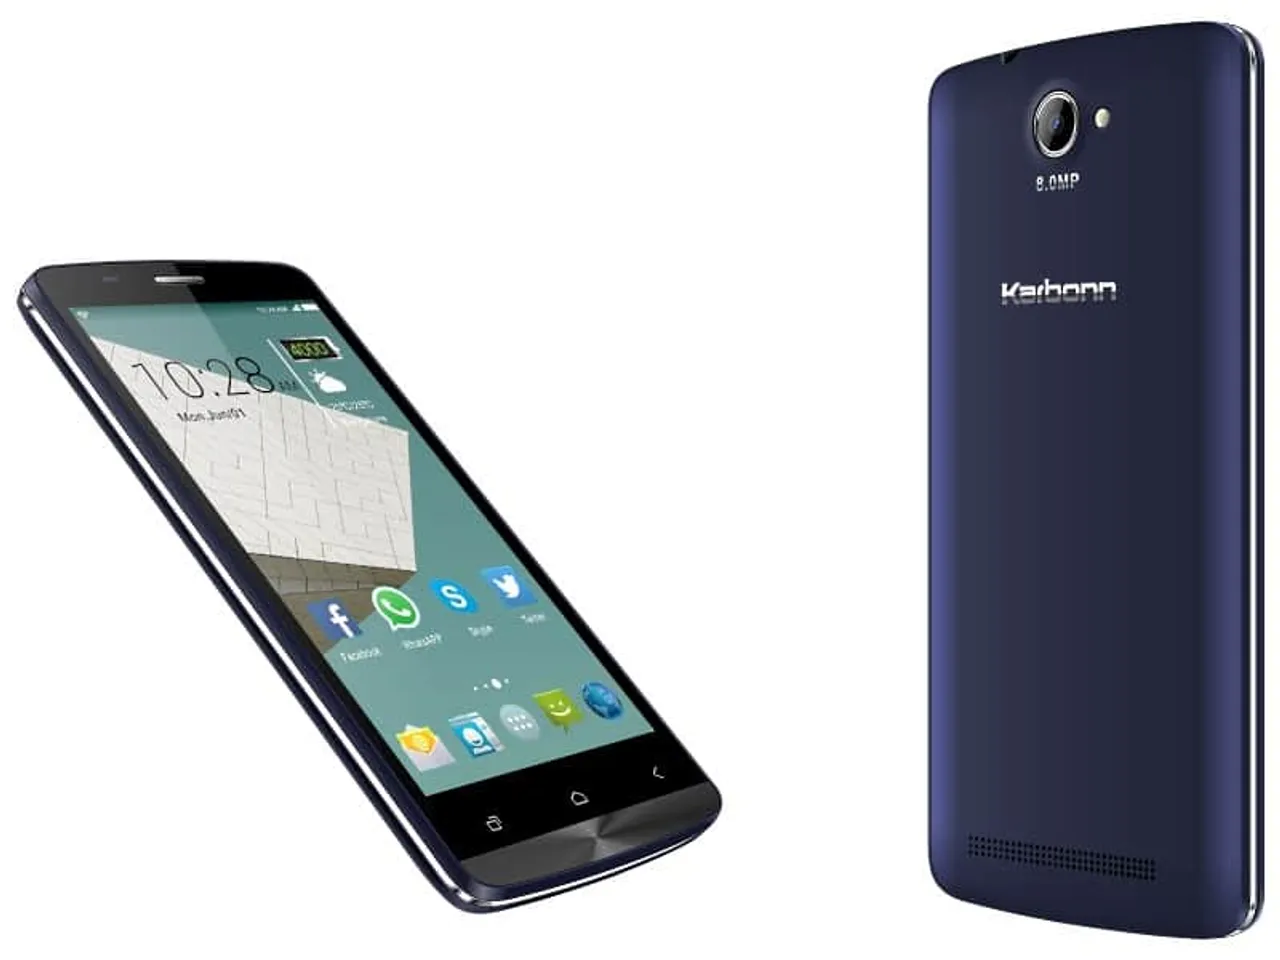 Karbonn Aura 9 smartphone with support for 21 Indian Languages, 4000mAh Battery, launched at Rs 6,390